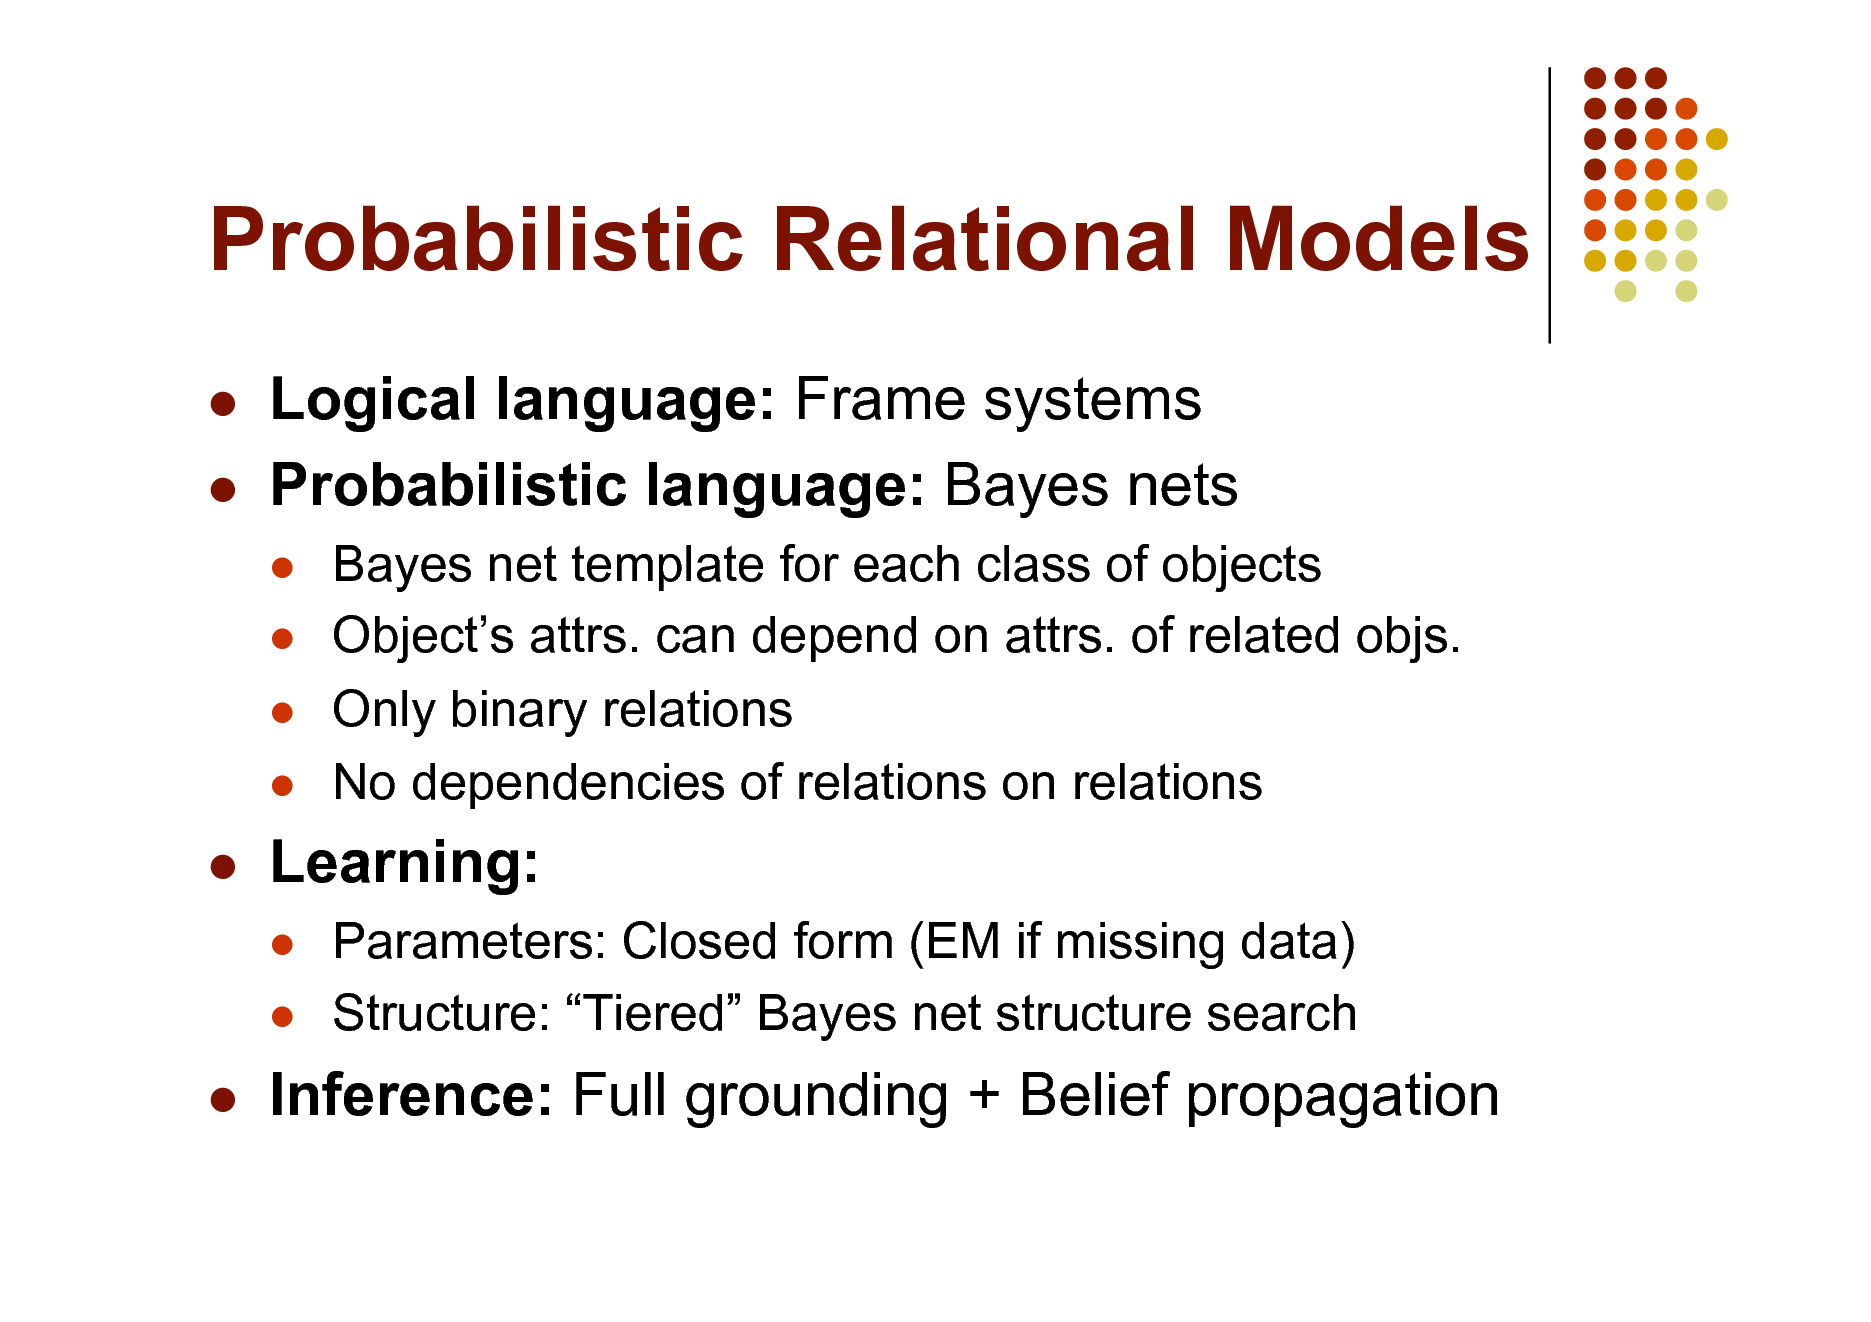 Slide: Probabilistic Relational Models
 

Logical language: Frame systems Probabilistic language: Bayes nets
   

Bayes net template for each class of objects Objects attrs. can depend on attrs. of related objs. Only binary relations No dependencies of relations on relations Parameters: Closed form (EM if missing data) Structure: Tiered Bayes net structure search



Learning:
 



Inference: Full grounding + Belief propagation

